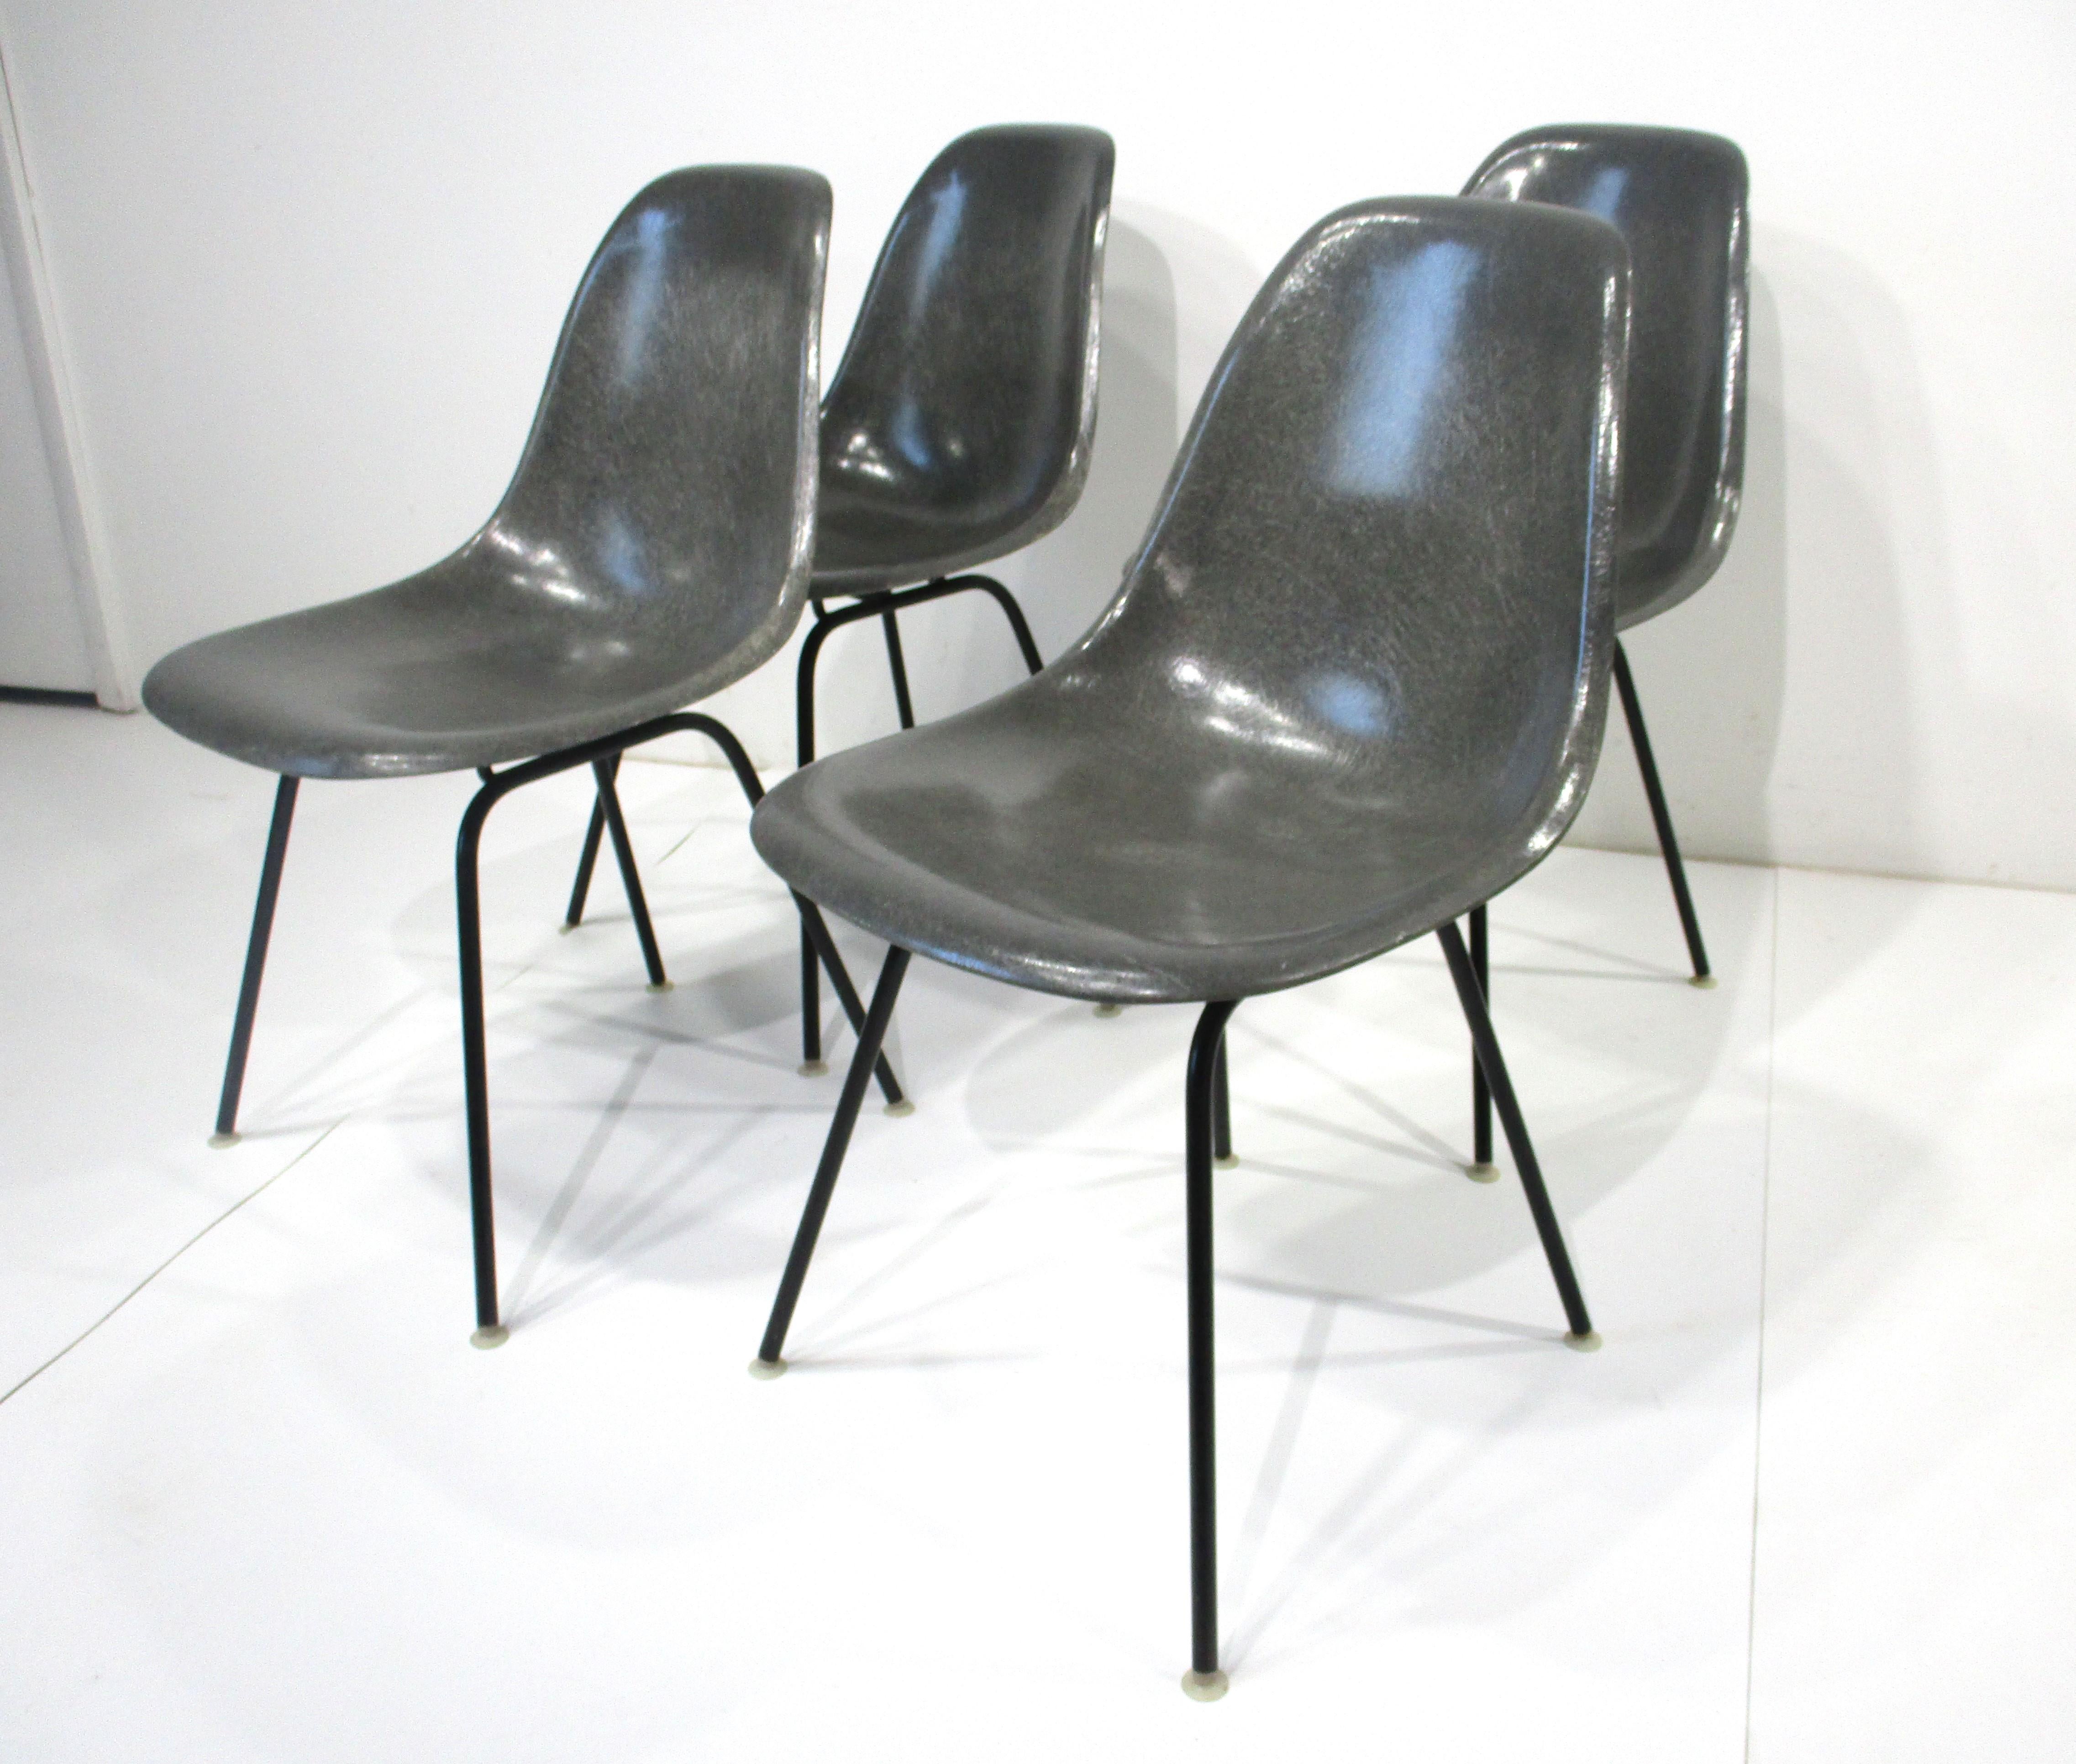 A set of four beautiful elephant hide gray fiberglass dining chairs with satin black metal H bases having nylon feet to protect your floors . Designed by the iconic Mid Century team of Ray and Charles Eames for the Herman Miller furniture company .  